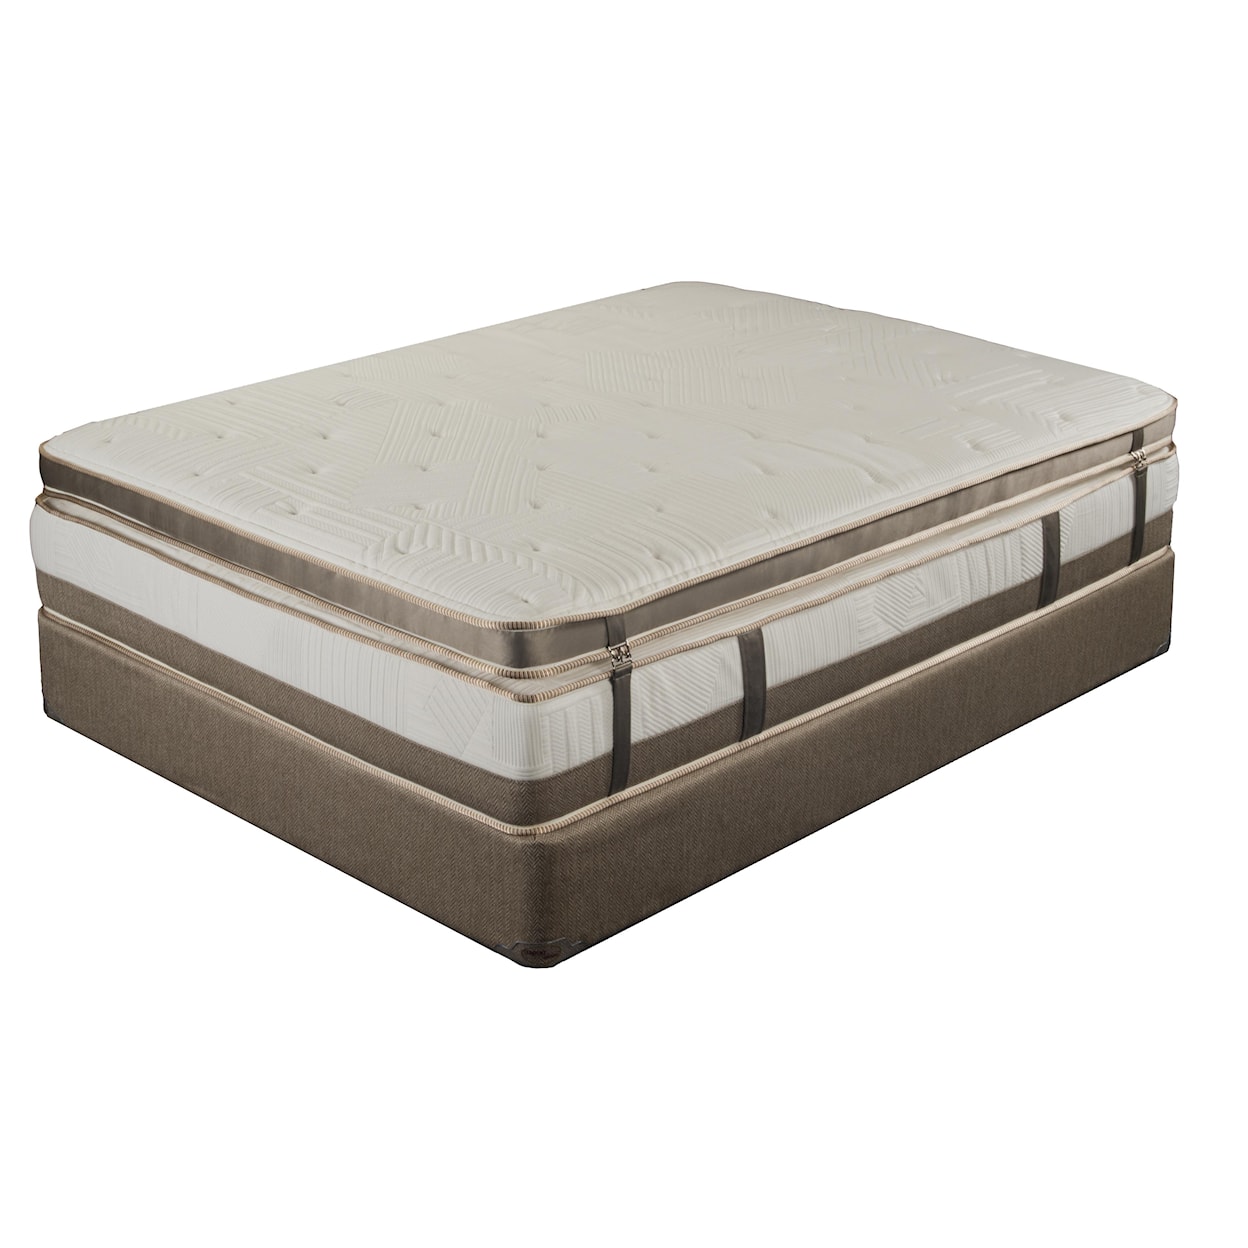 King Koil Extended Life 3300 Queen Mattress Set with Removable Top Layer